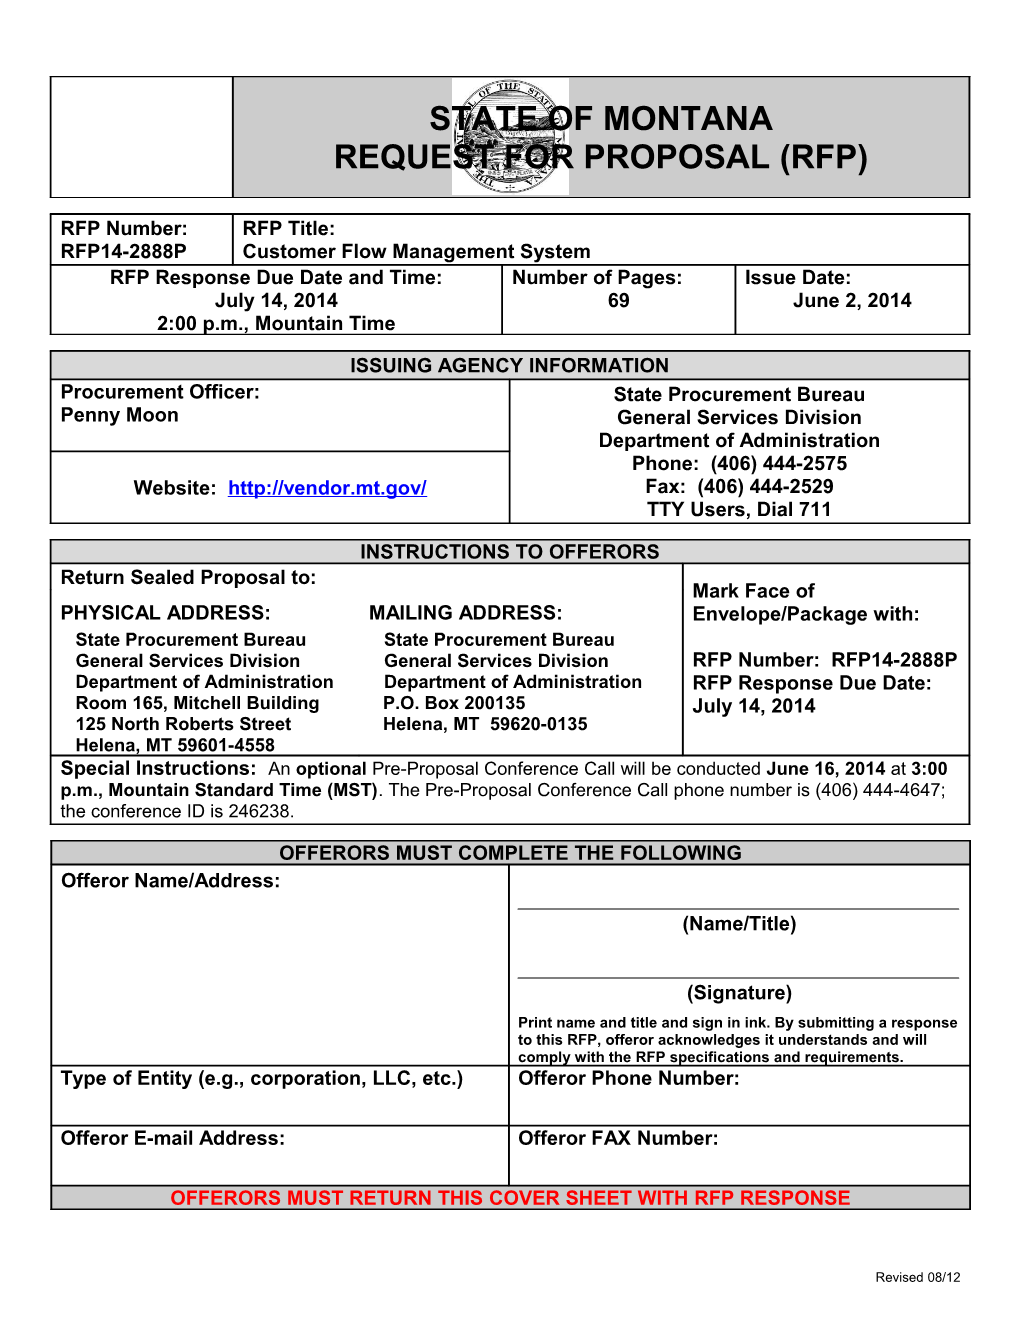 RFP14-2888P, Customer Flow Management System, Page 1